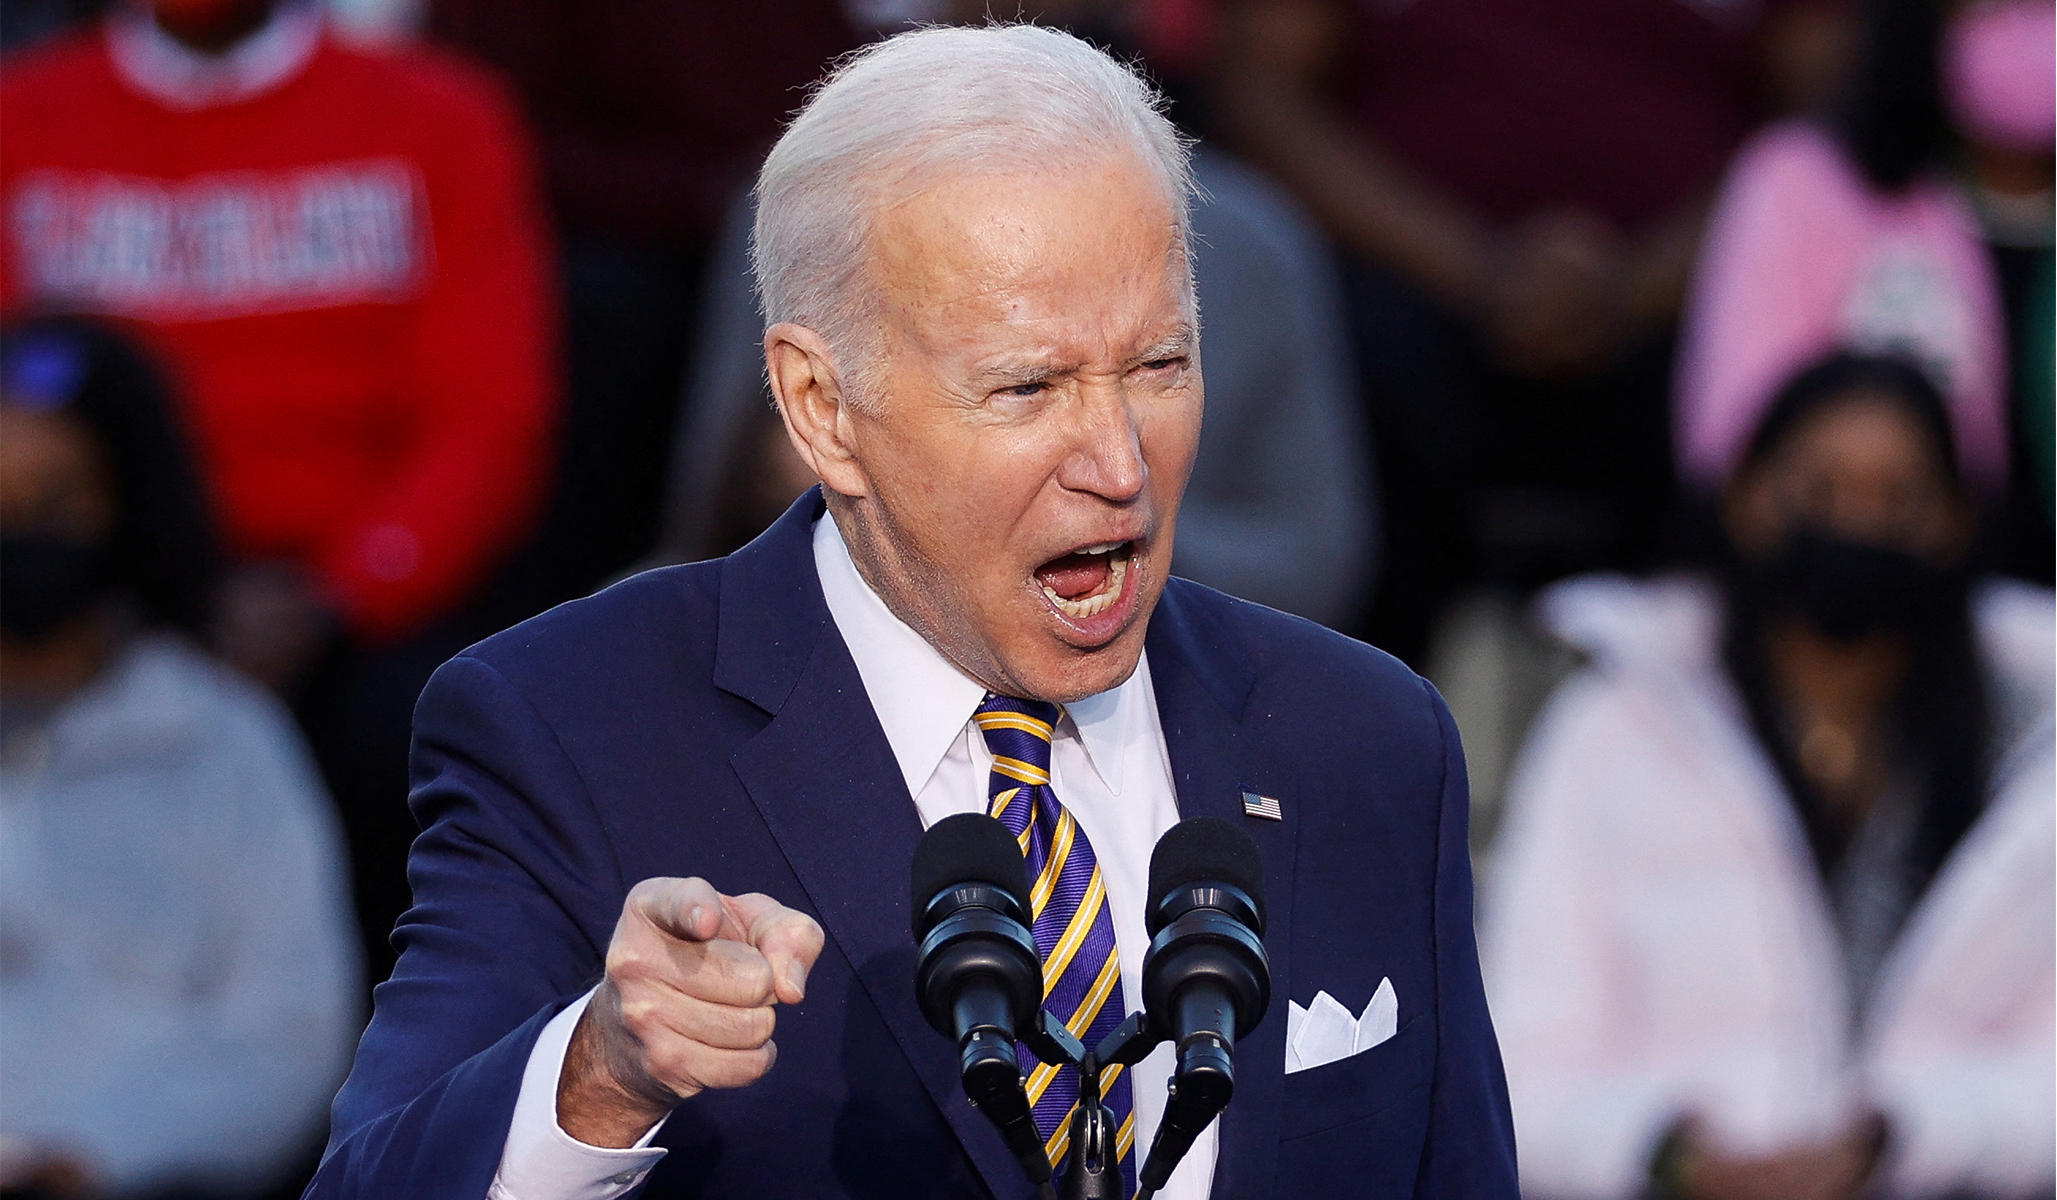 Poll: Half of Americans ‘Frustrated,’ ‘Disappointed’ with Biden’s Presidency